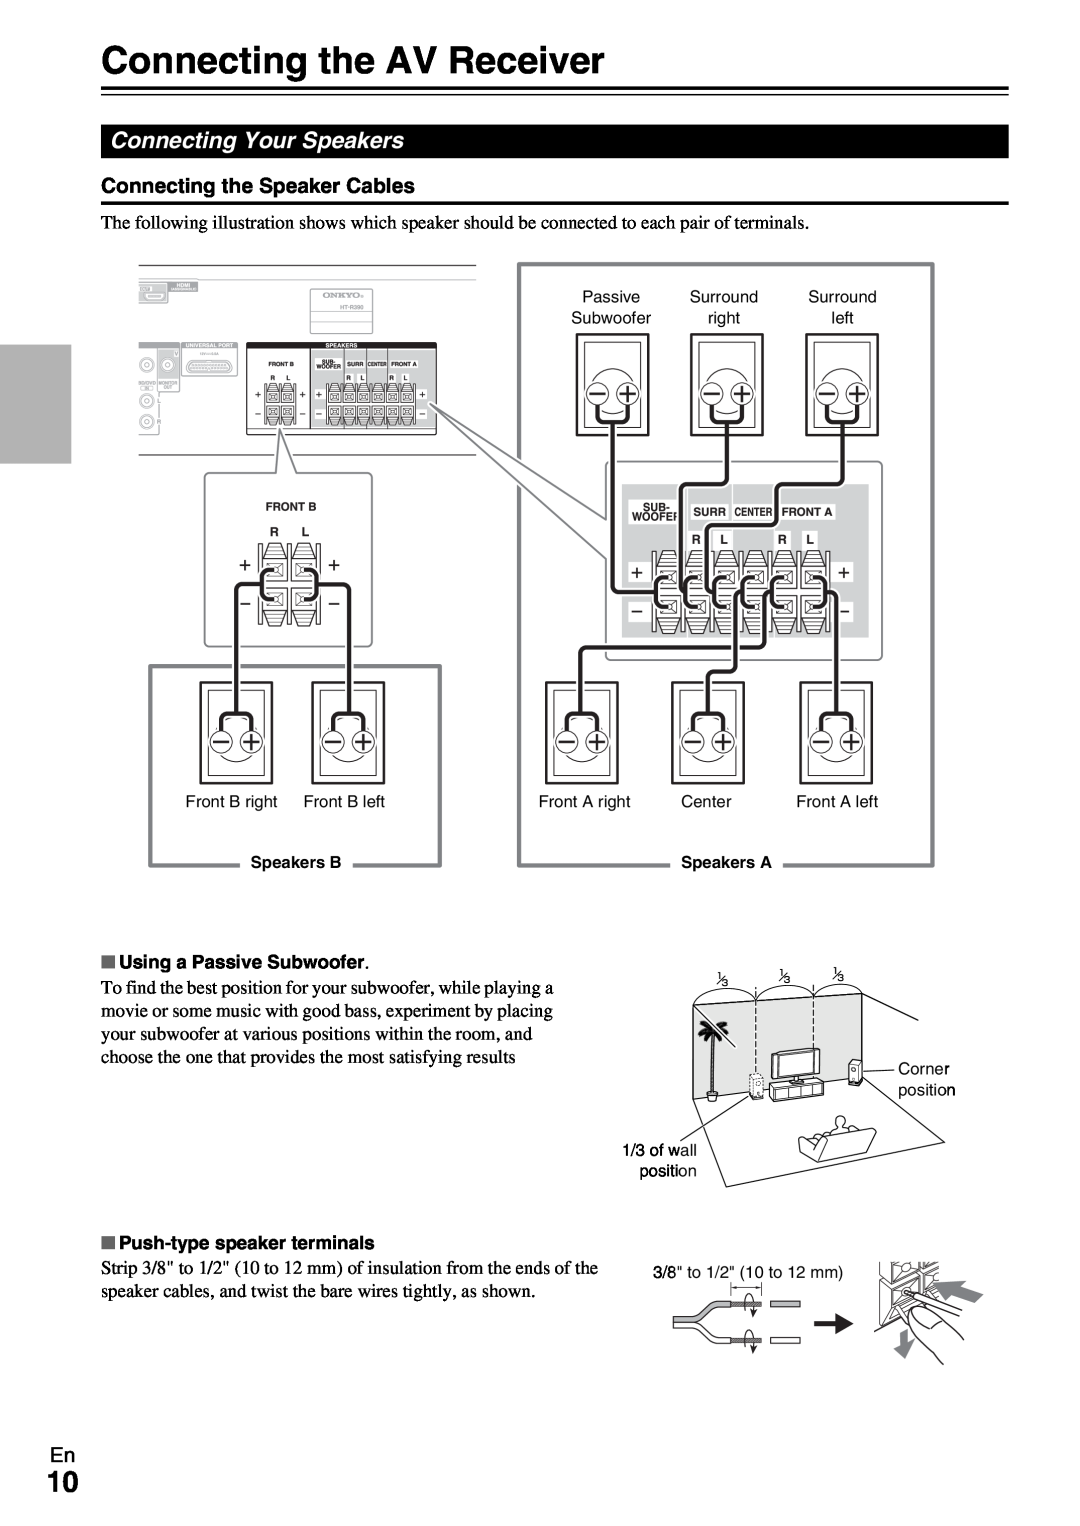 Onkyo HT-R390 instruction manual Connecting the AV Receiver, Connecting Your Speakers, Connecting the Speaker Cables 